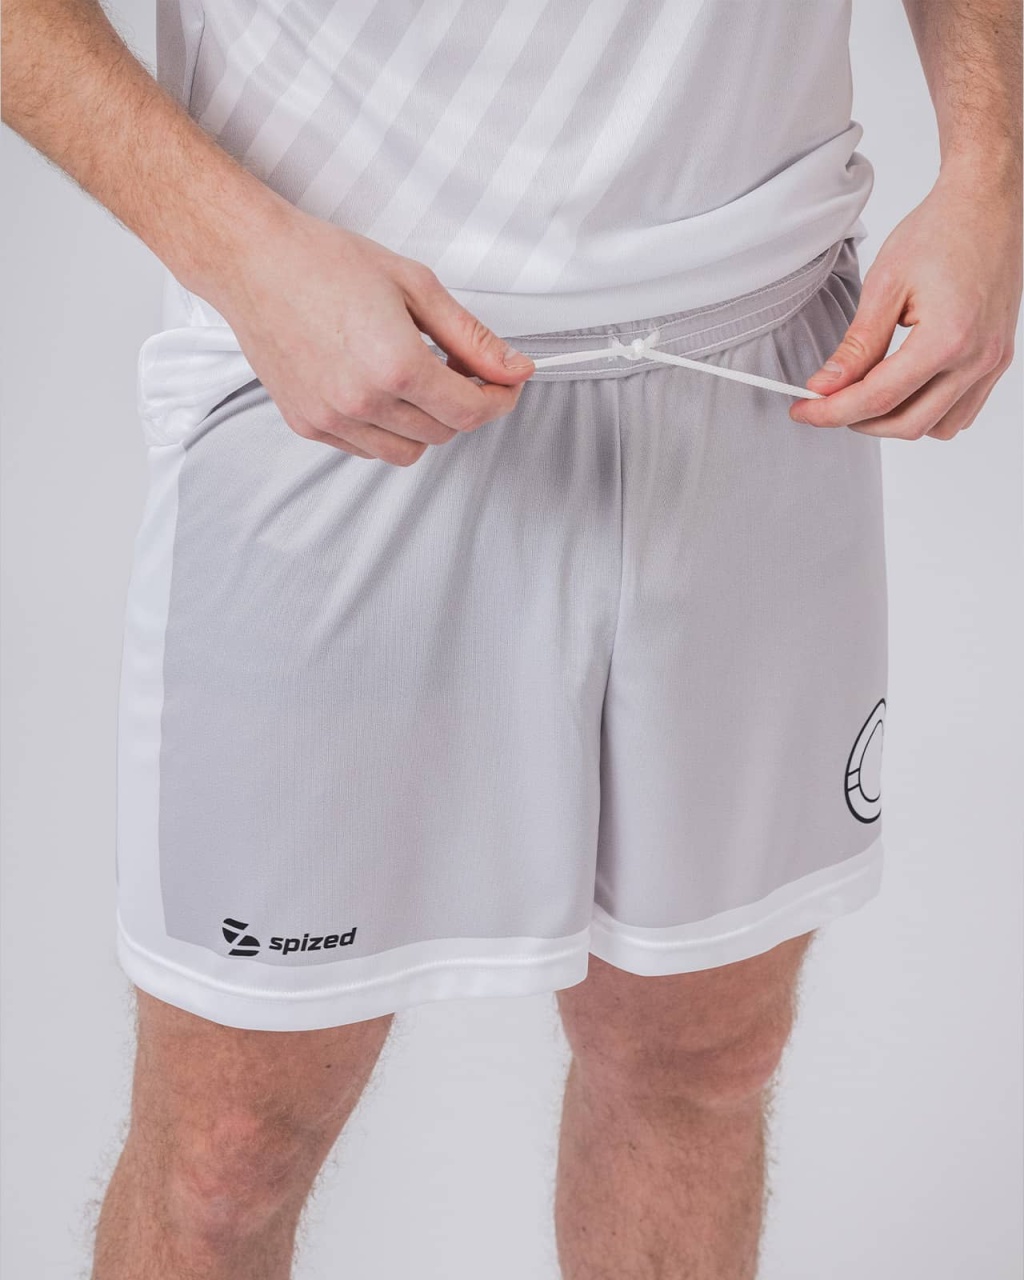 Diver men’s volleyball trousers